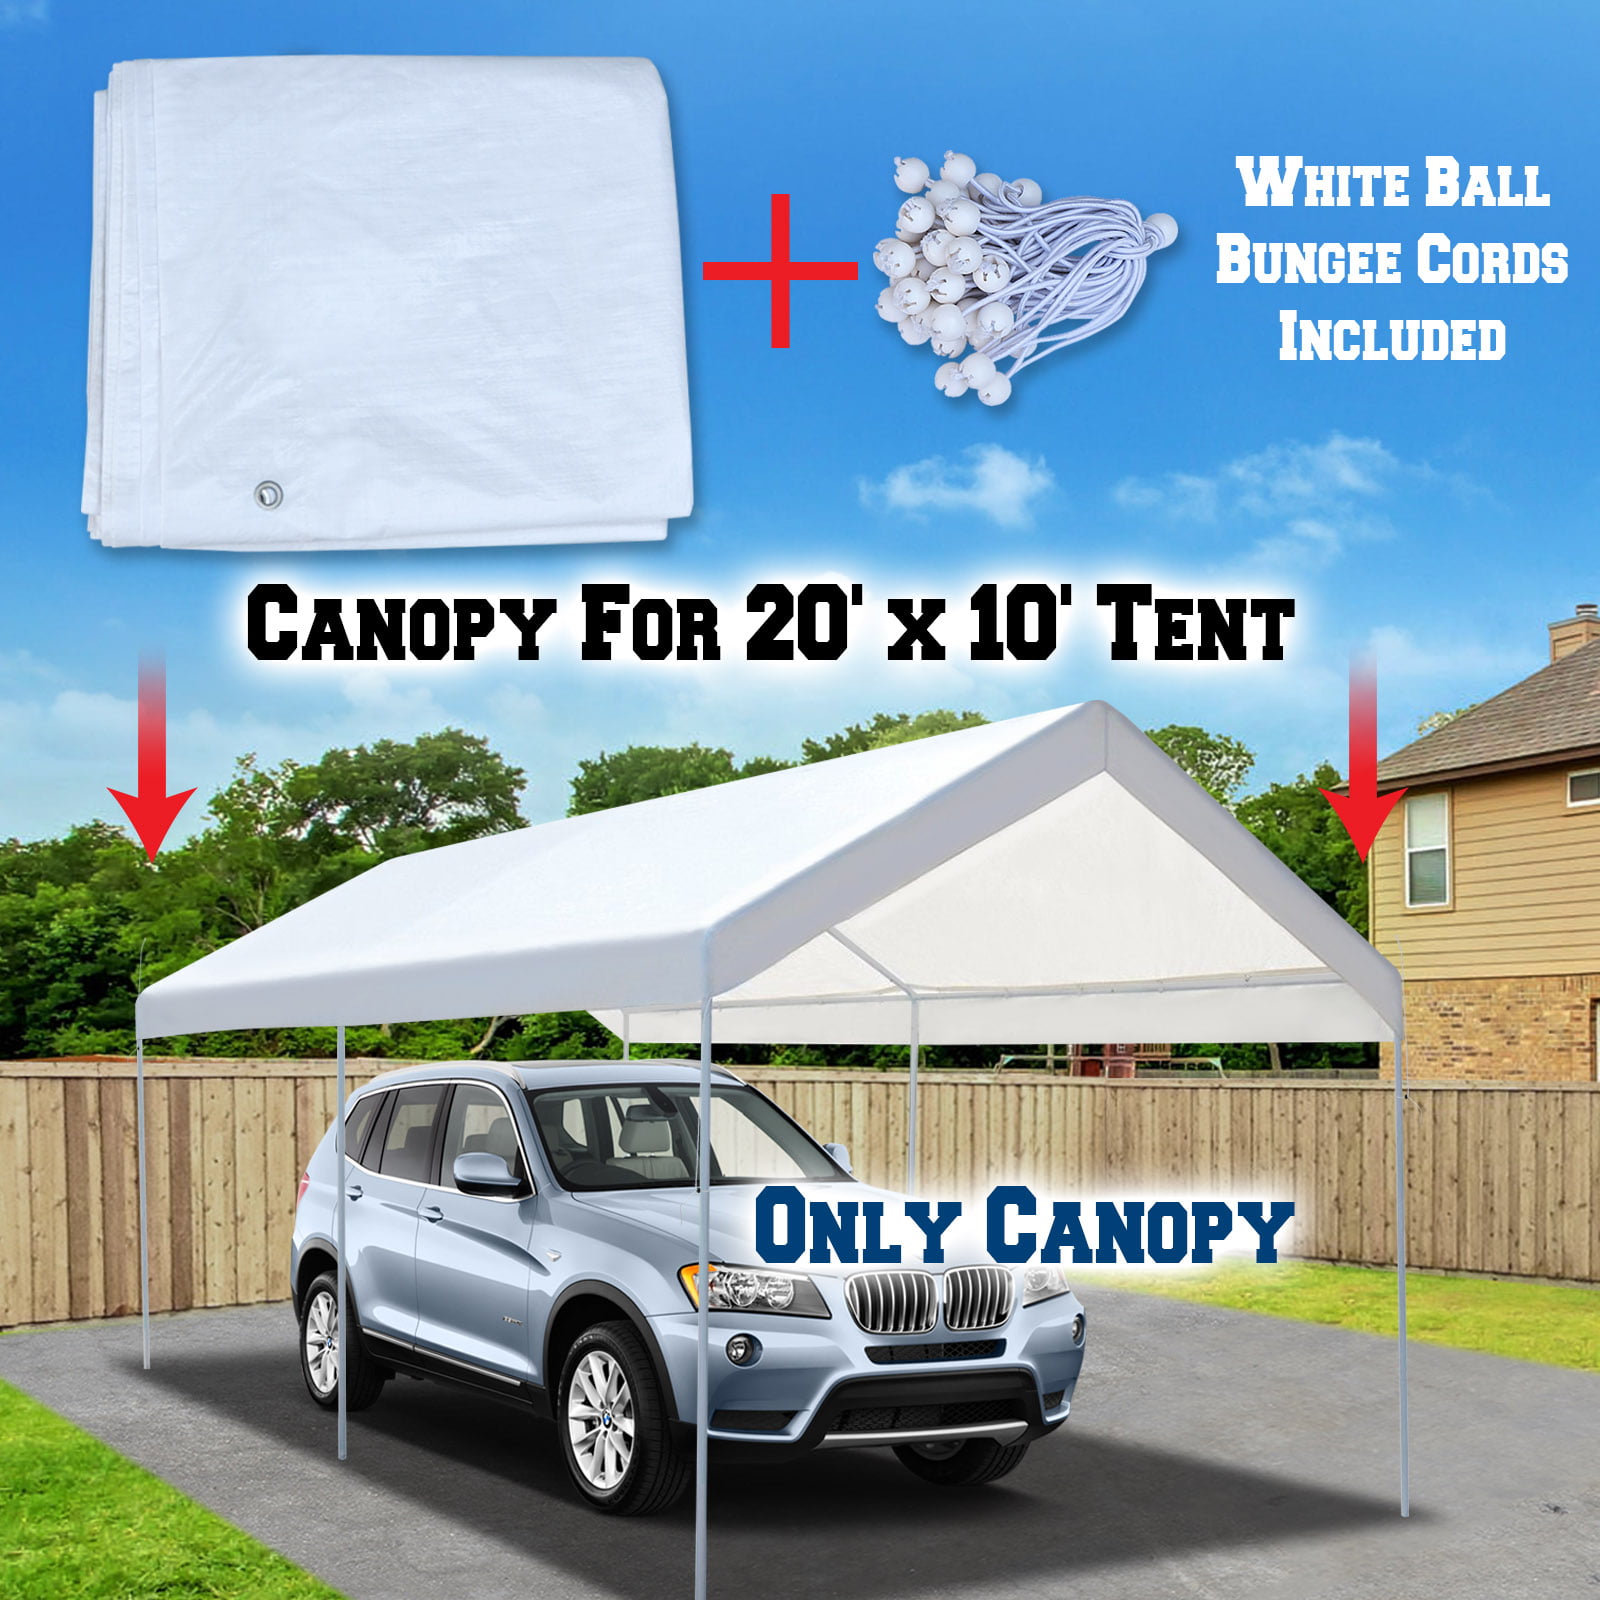 Only Cover, Frame Not Included 10 x 20 Feet Carport Replacement Canopy Cover for Car Tent Top Garage Shelter Cover with Ball Bungees White1 